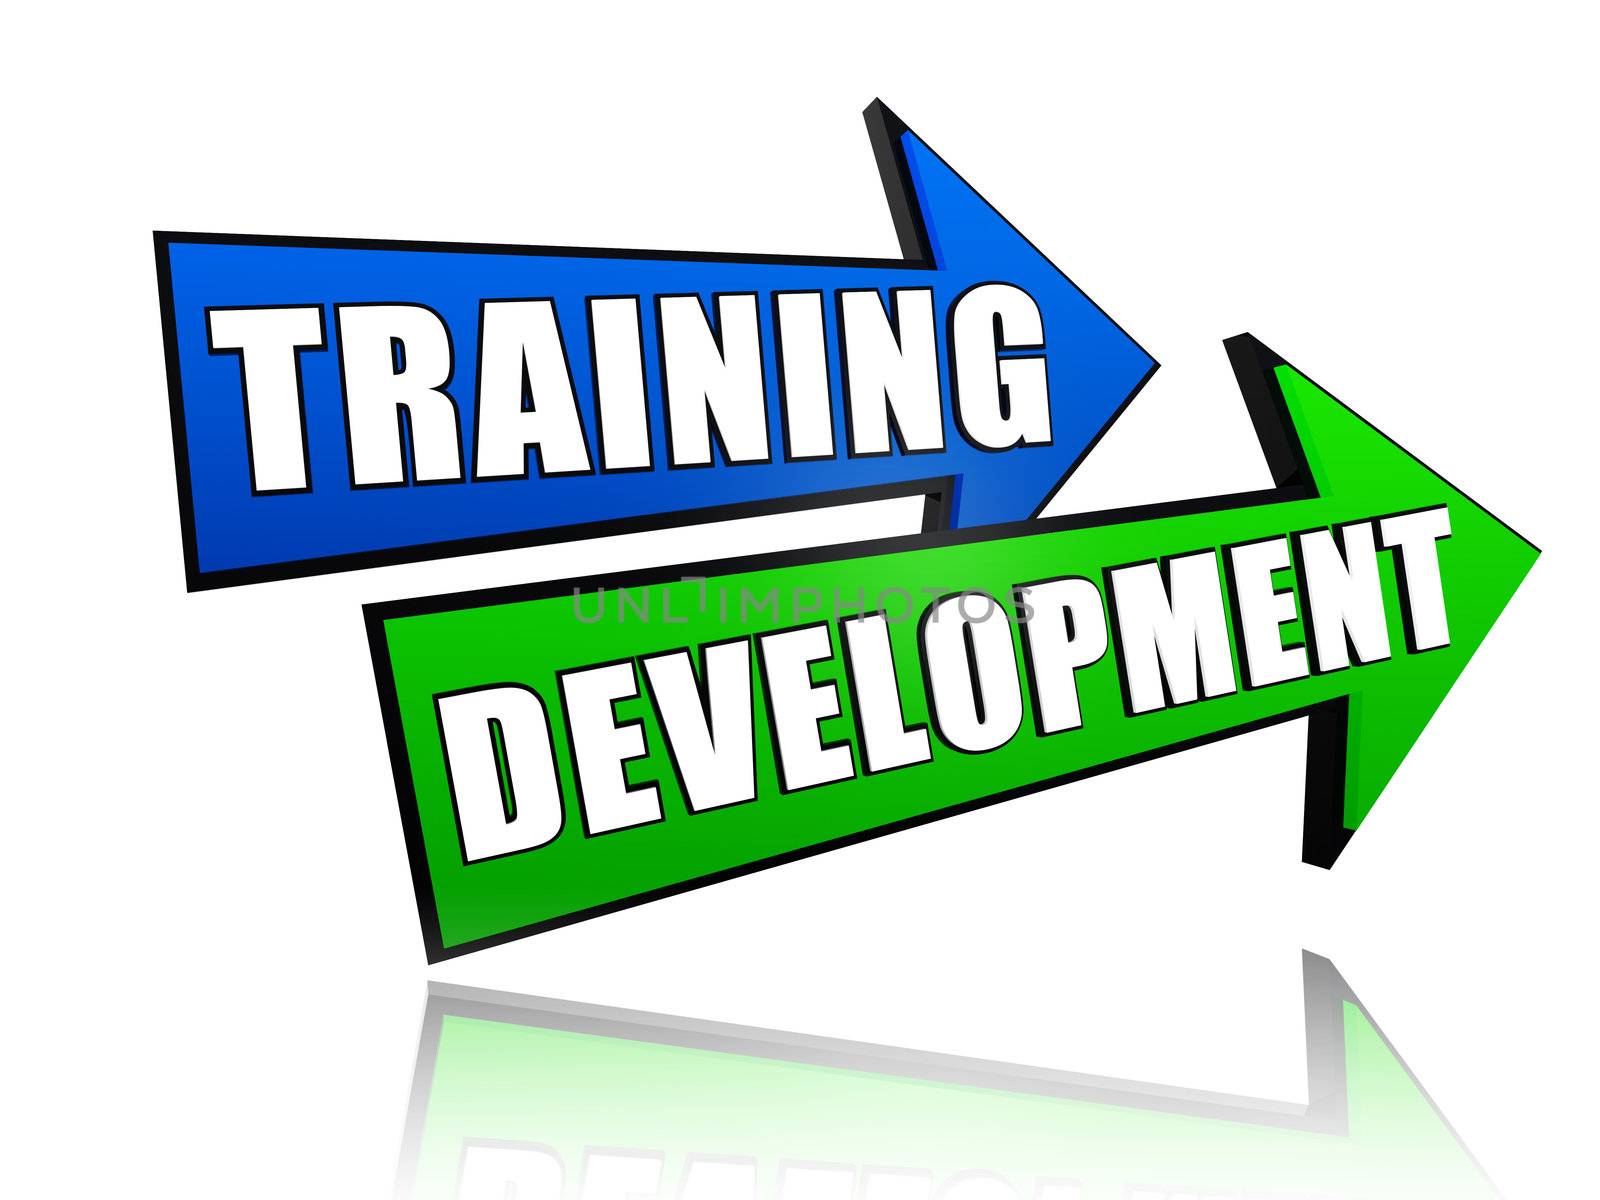 text training development in 3d colored arrows, business concept